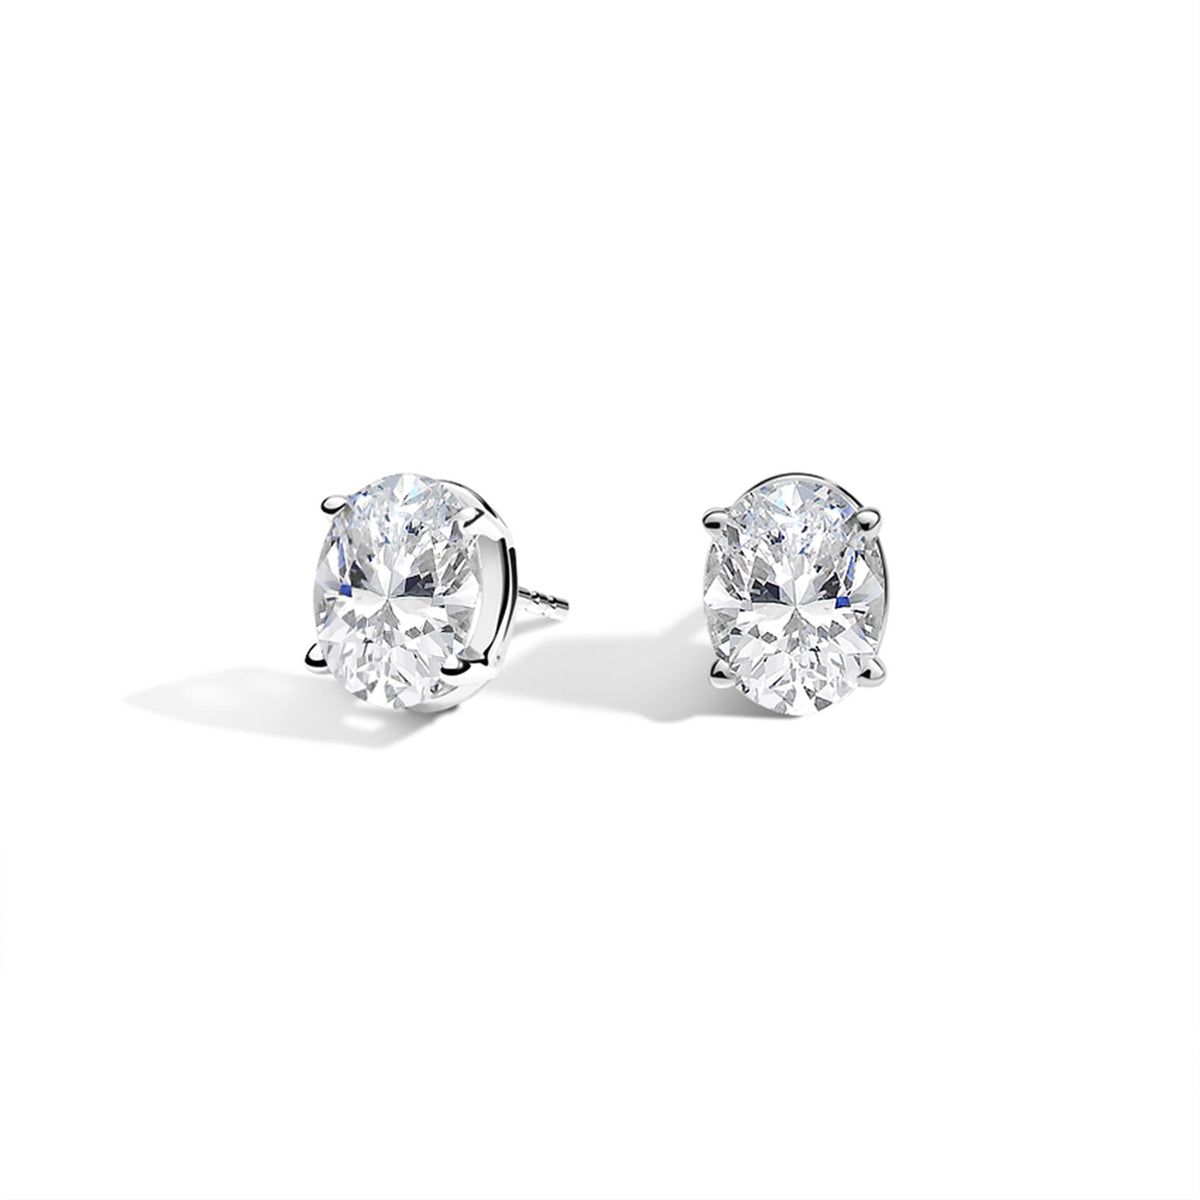 14Kt White Gold Oval Stud Earrings .75cttw Natural Diamonds